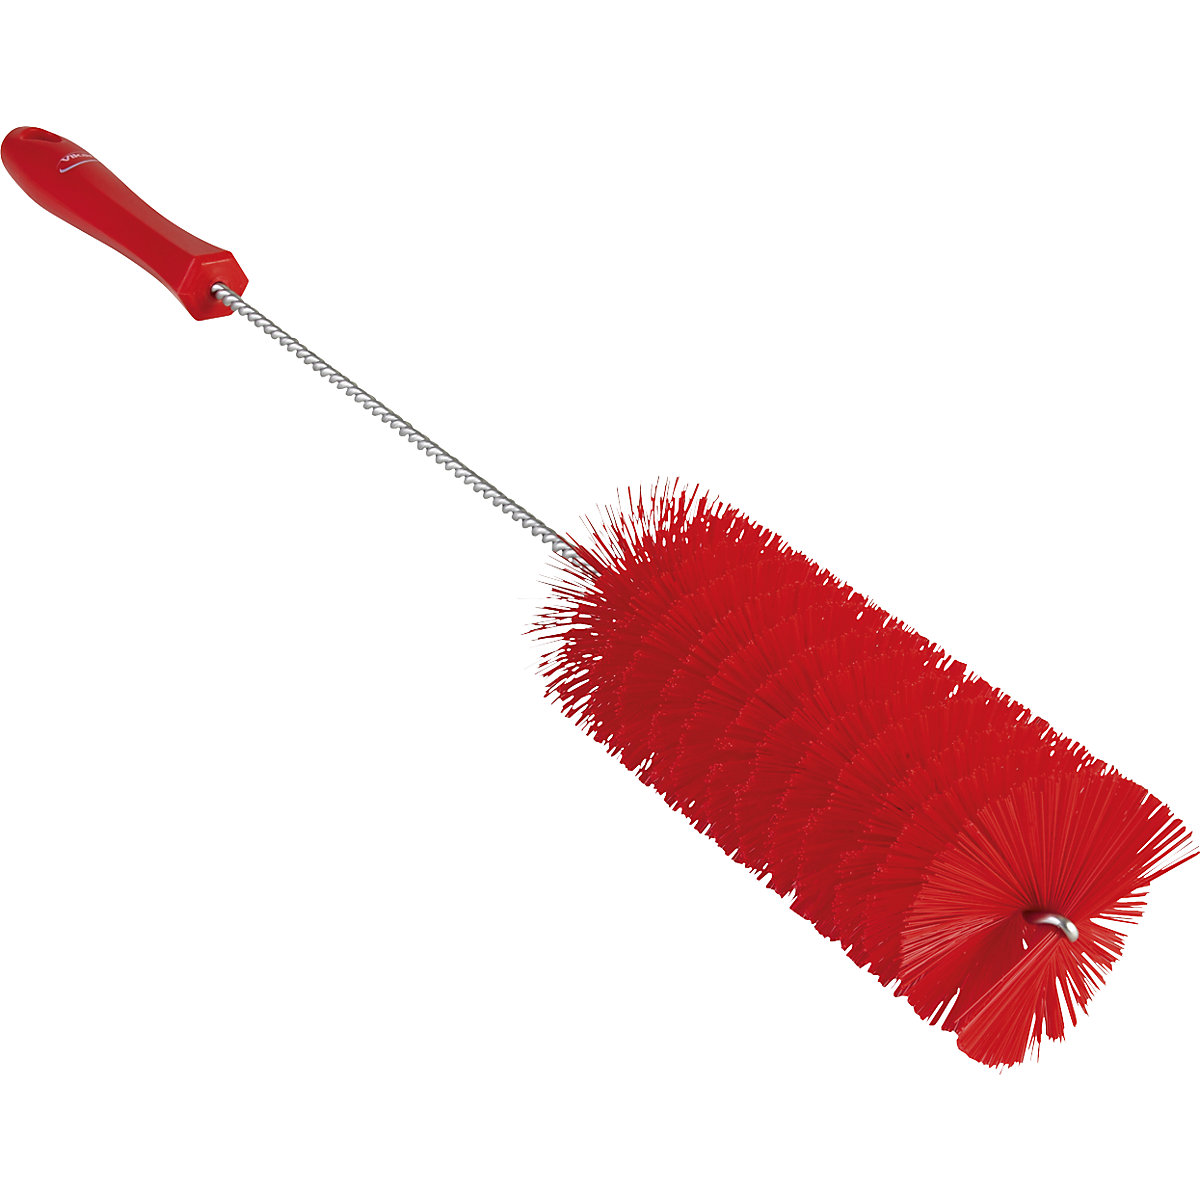 Pipe brush with handle – Vikan, medium, Ø 60 mm, pack of 15, red-4